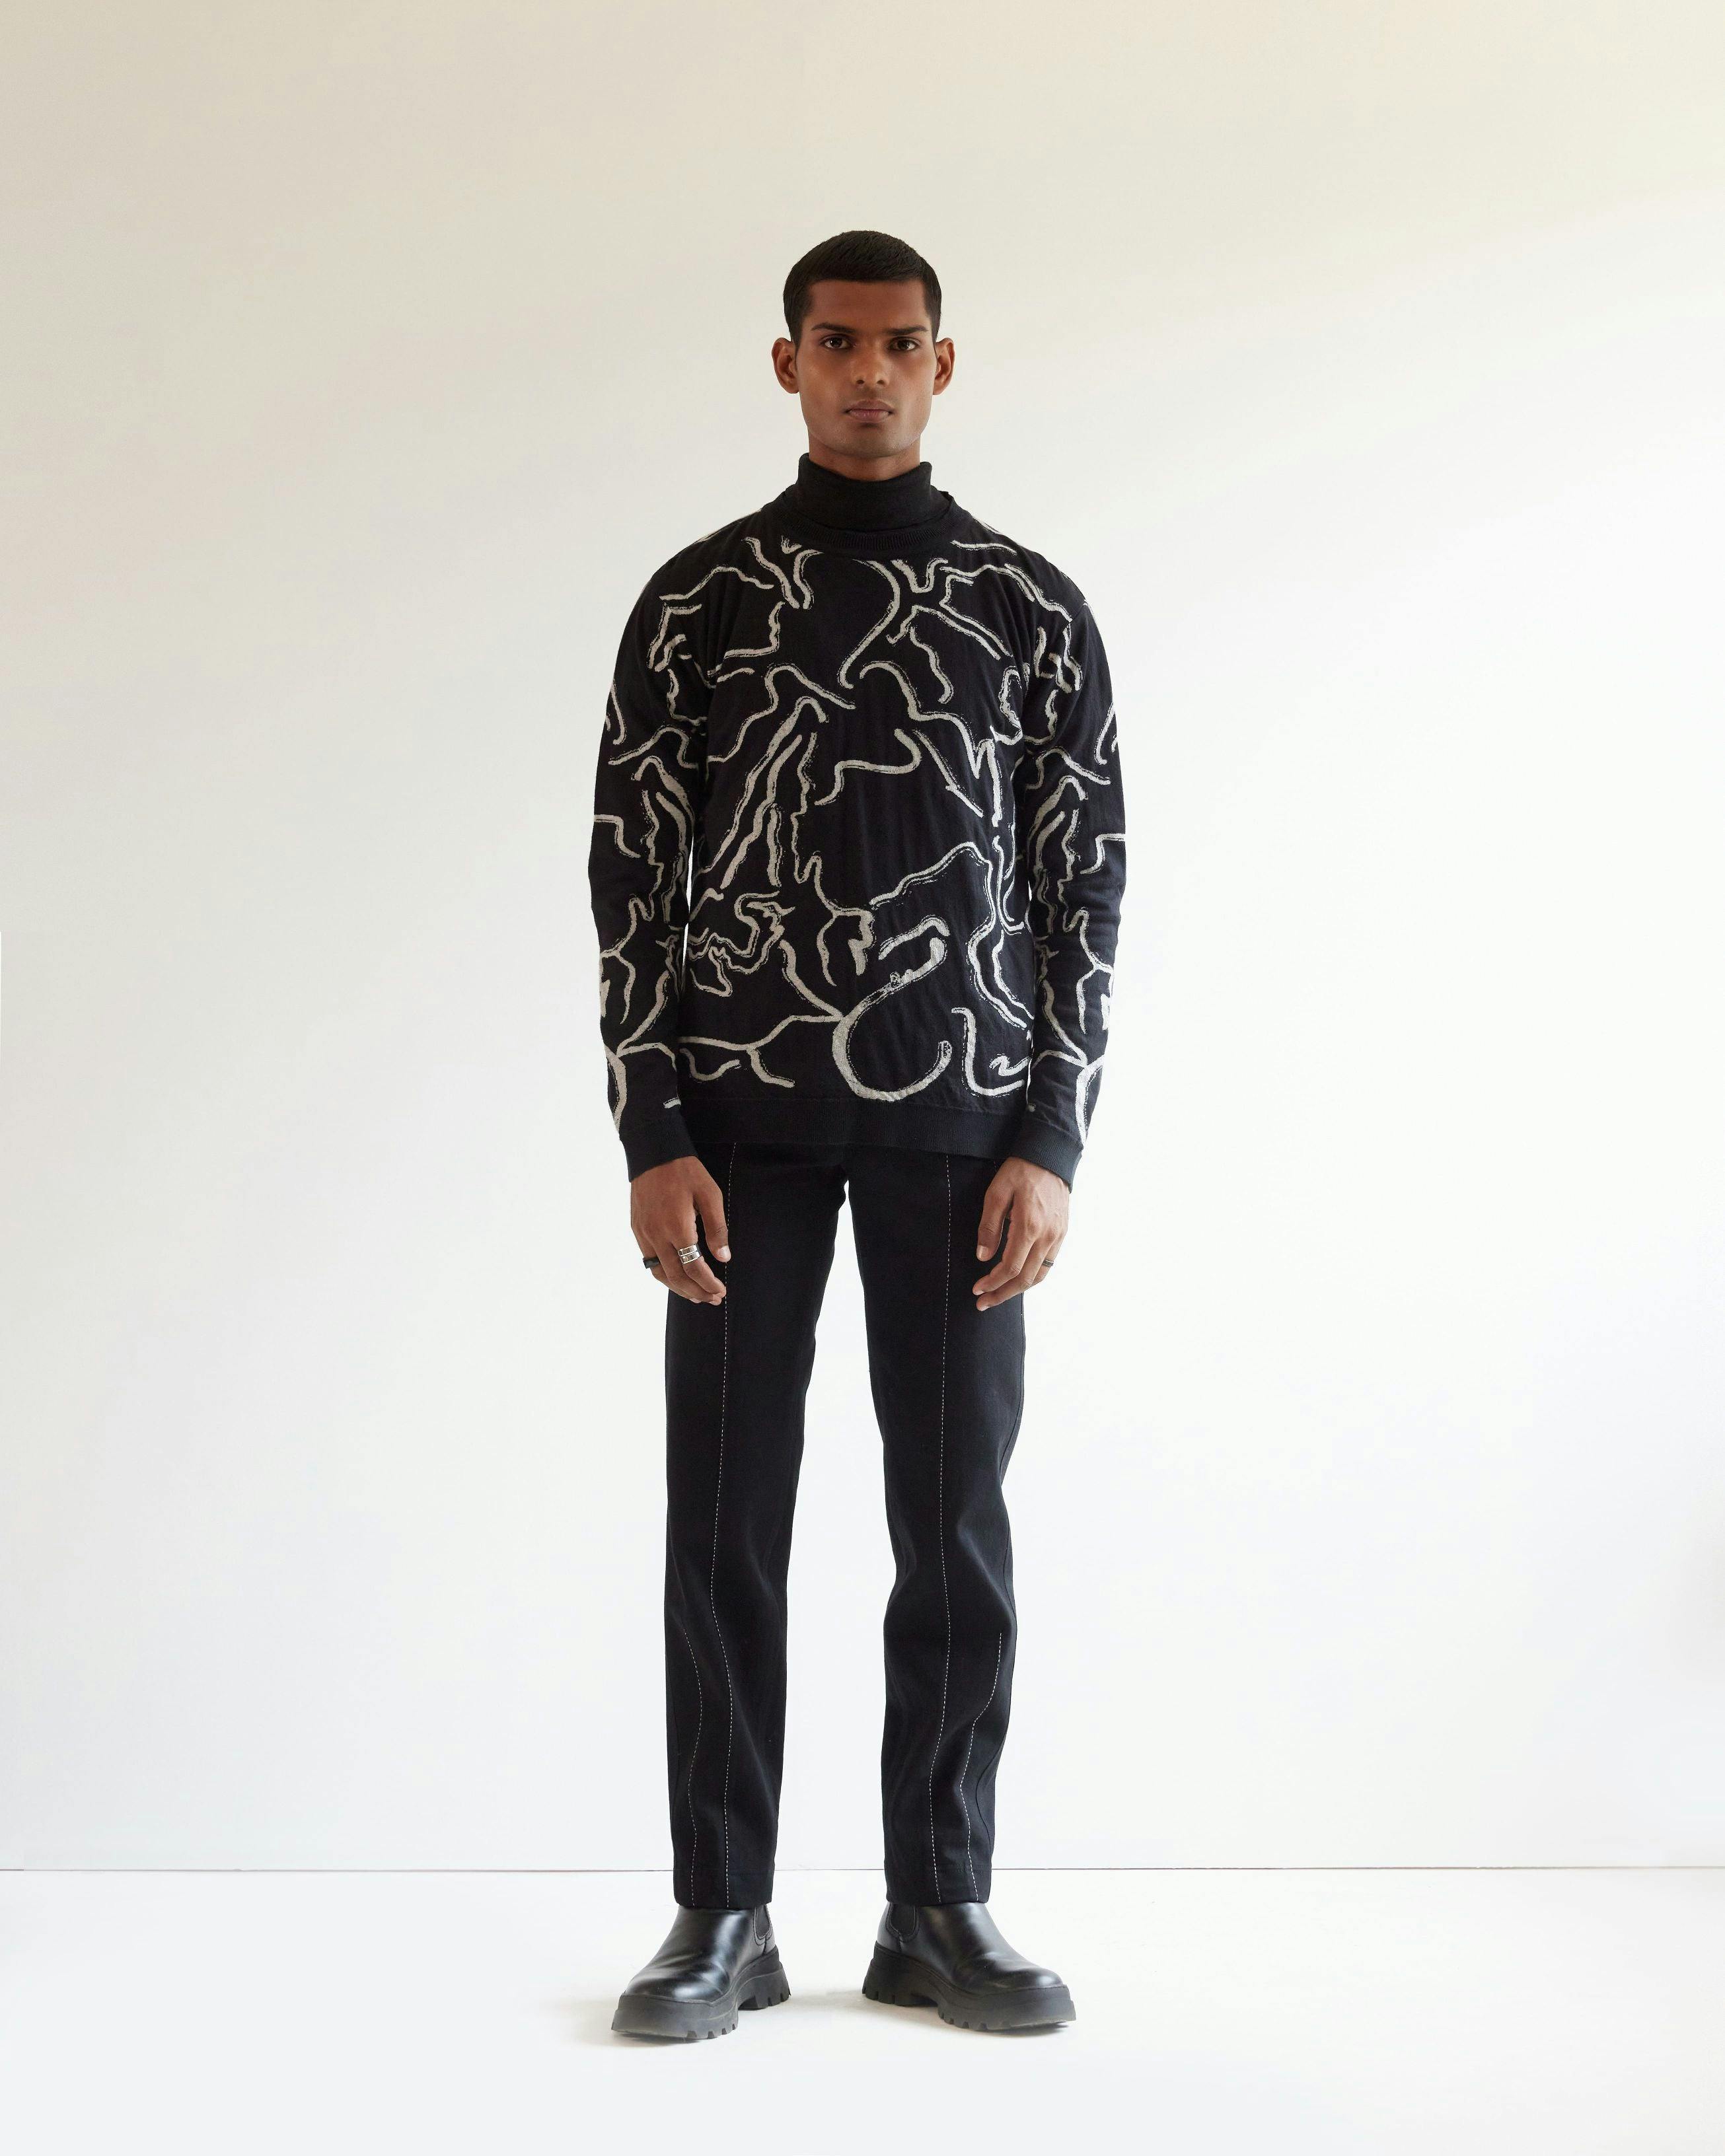 Desert Wave Jacquard Sweater, a product by Country Made